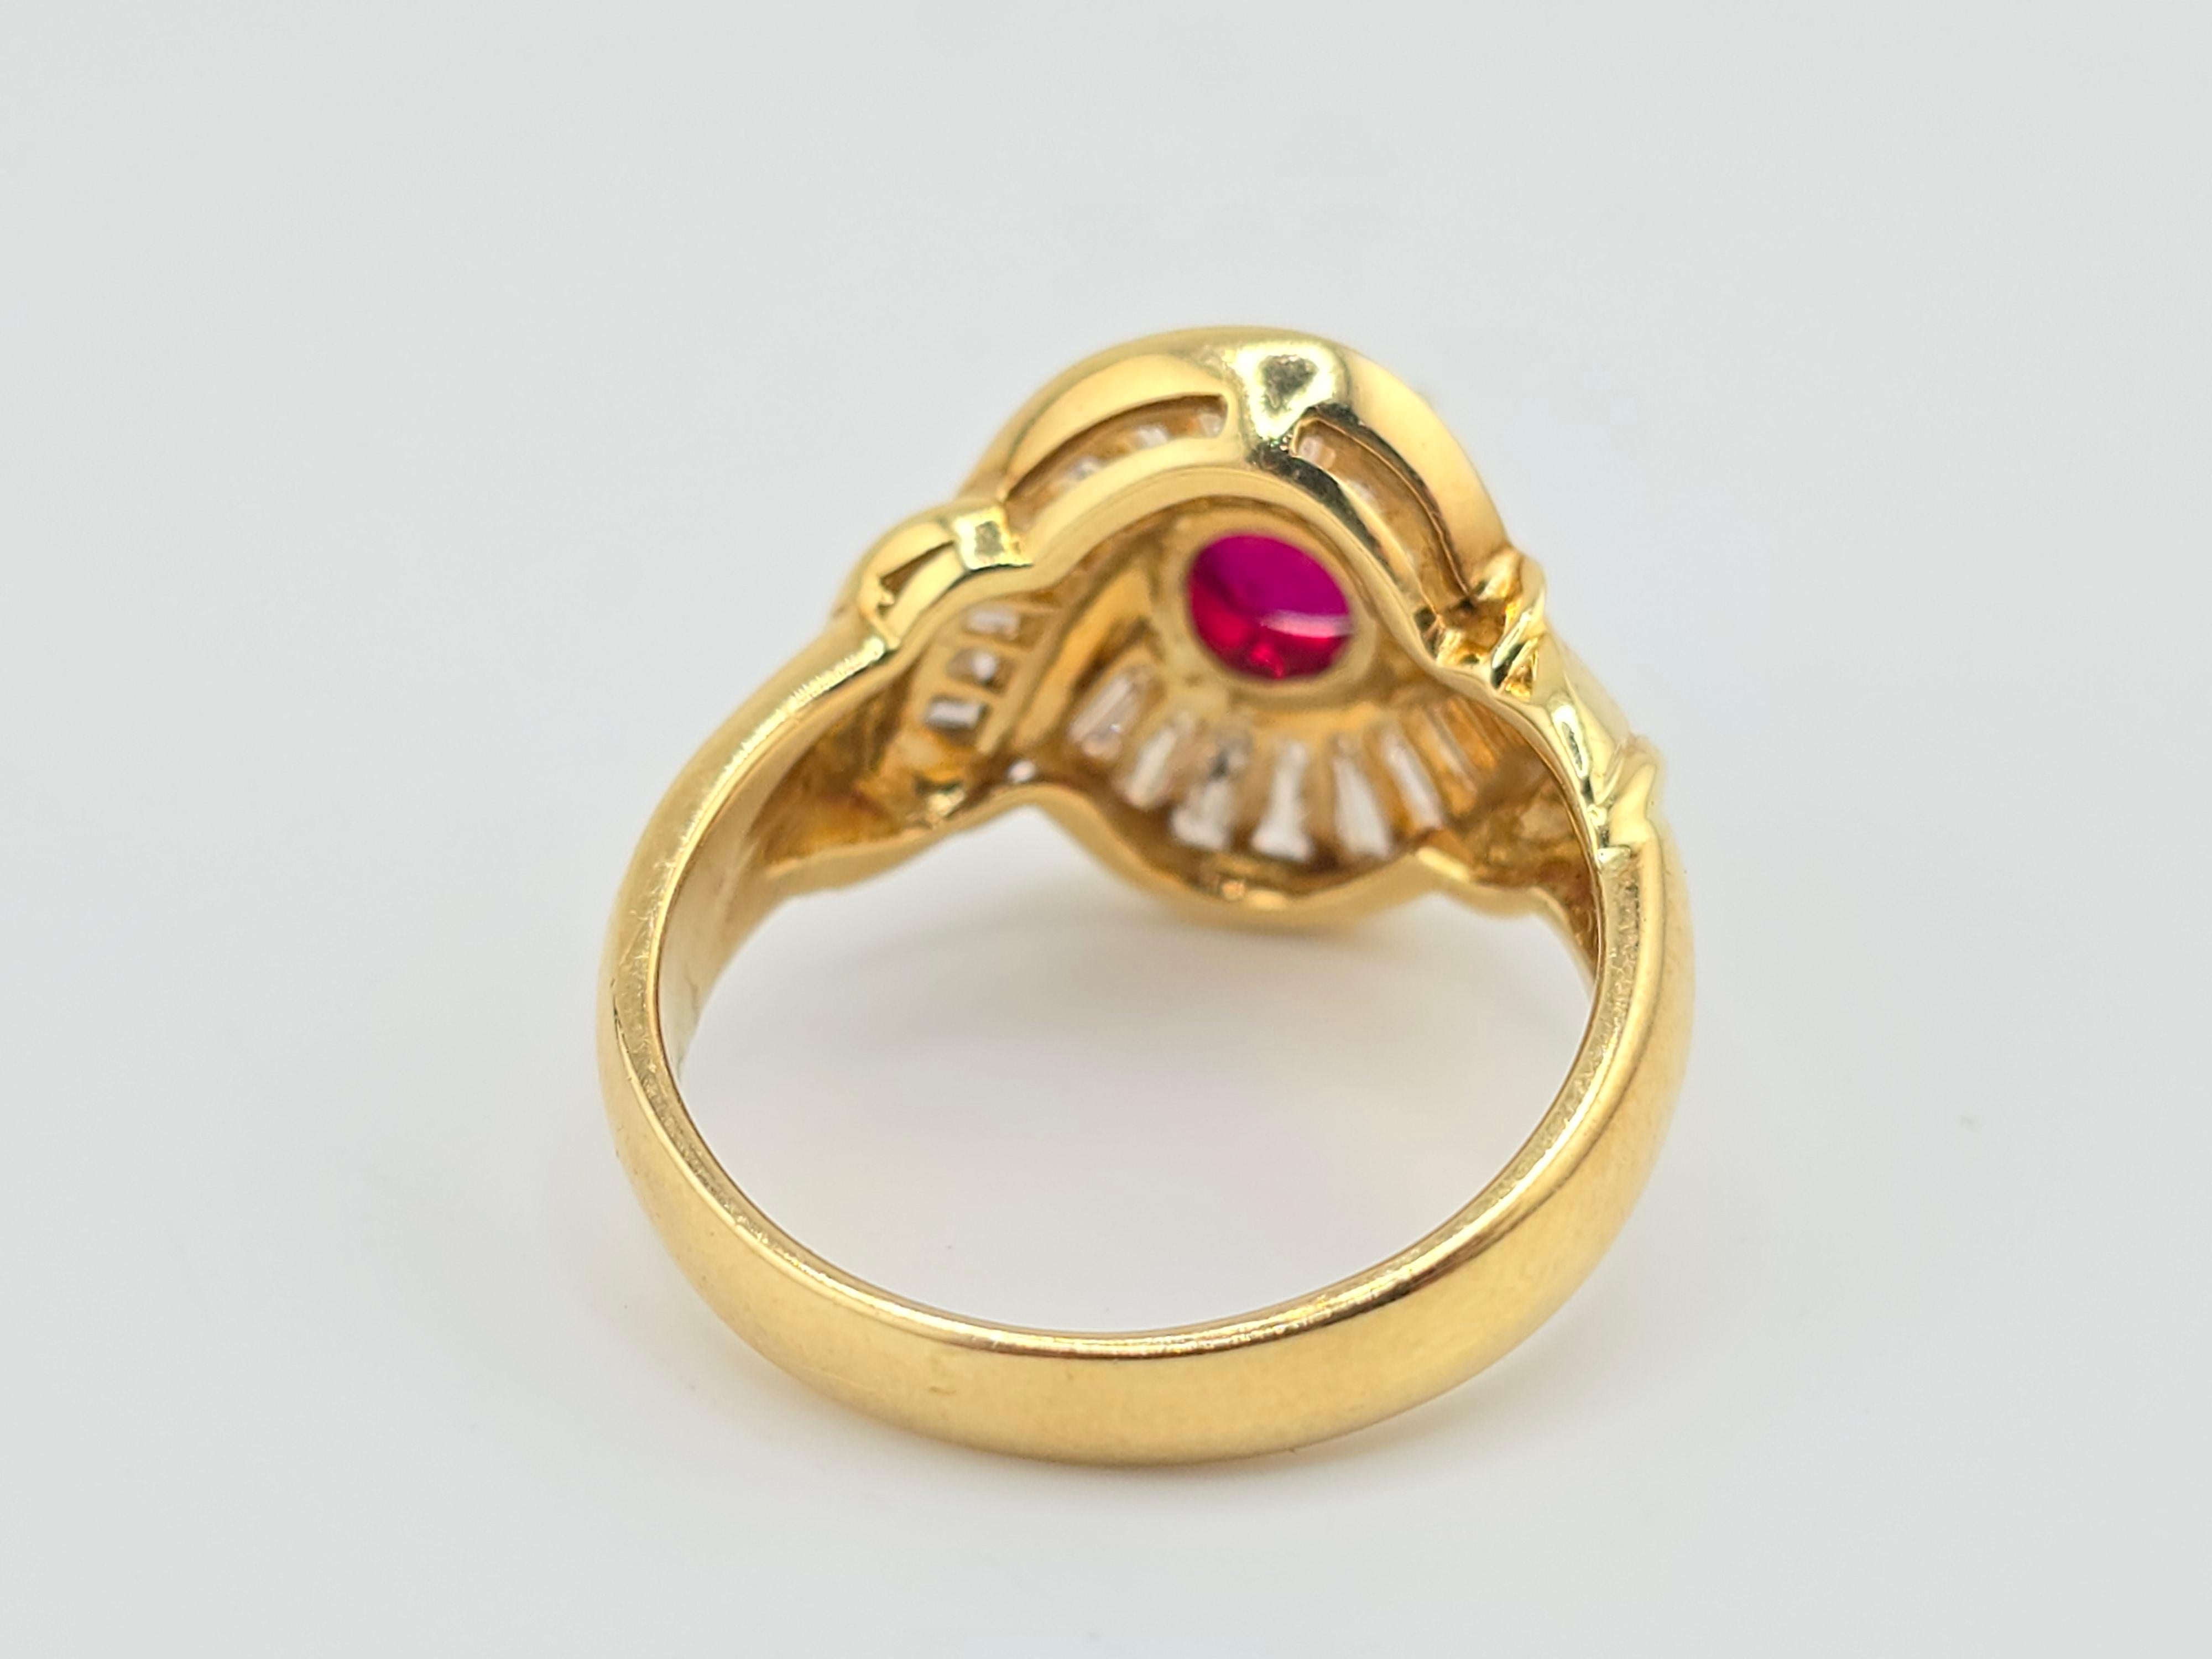 Superb Vivid Ruby & Diamond 18K Yellow Gold Ring 6.90 Grams In Good Condition For Sale In Media, PA